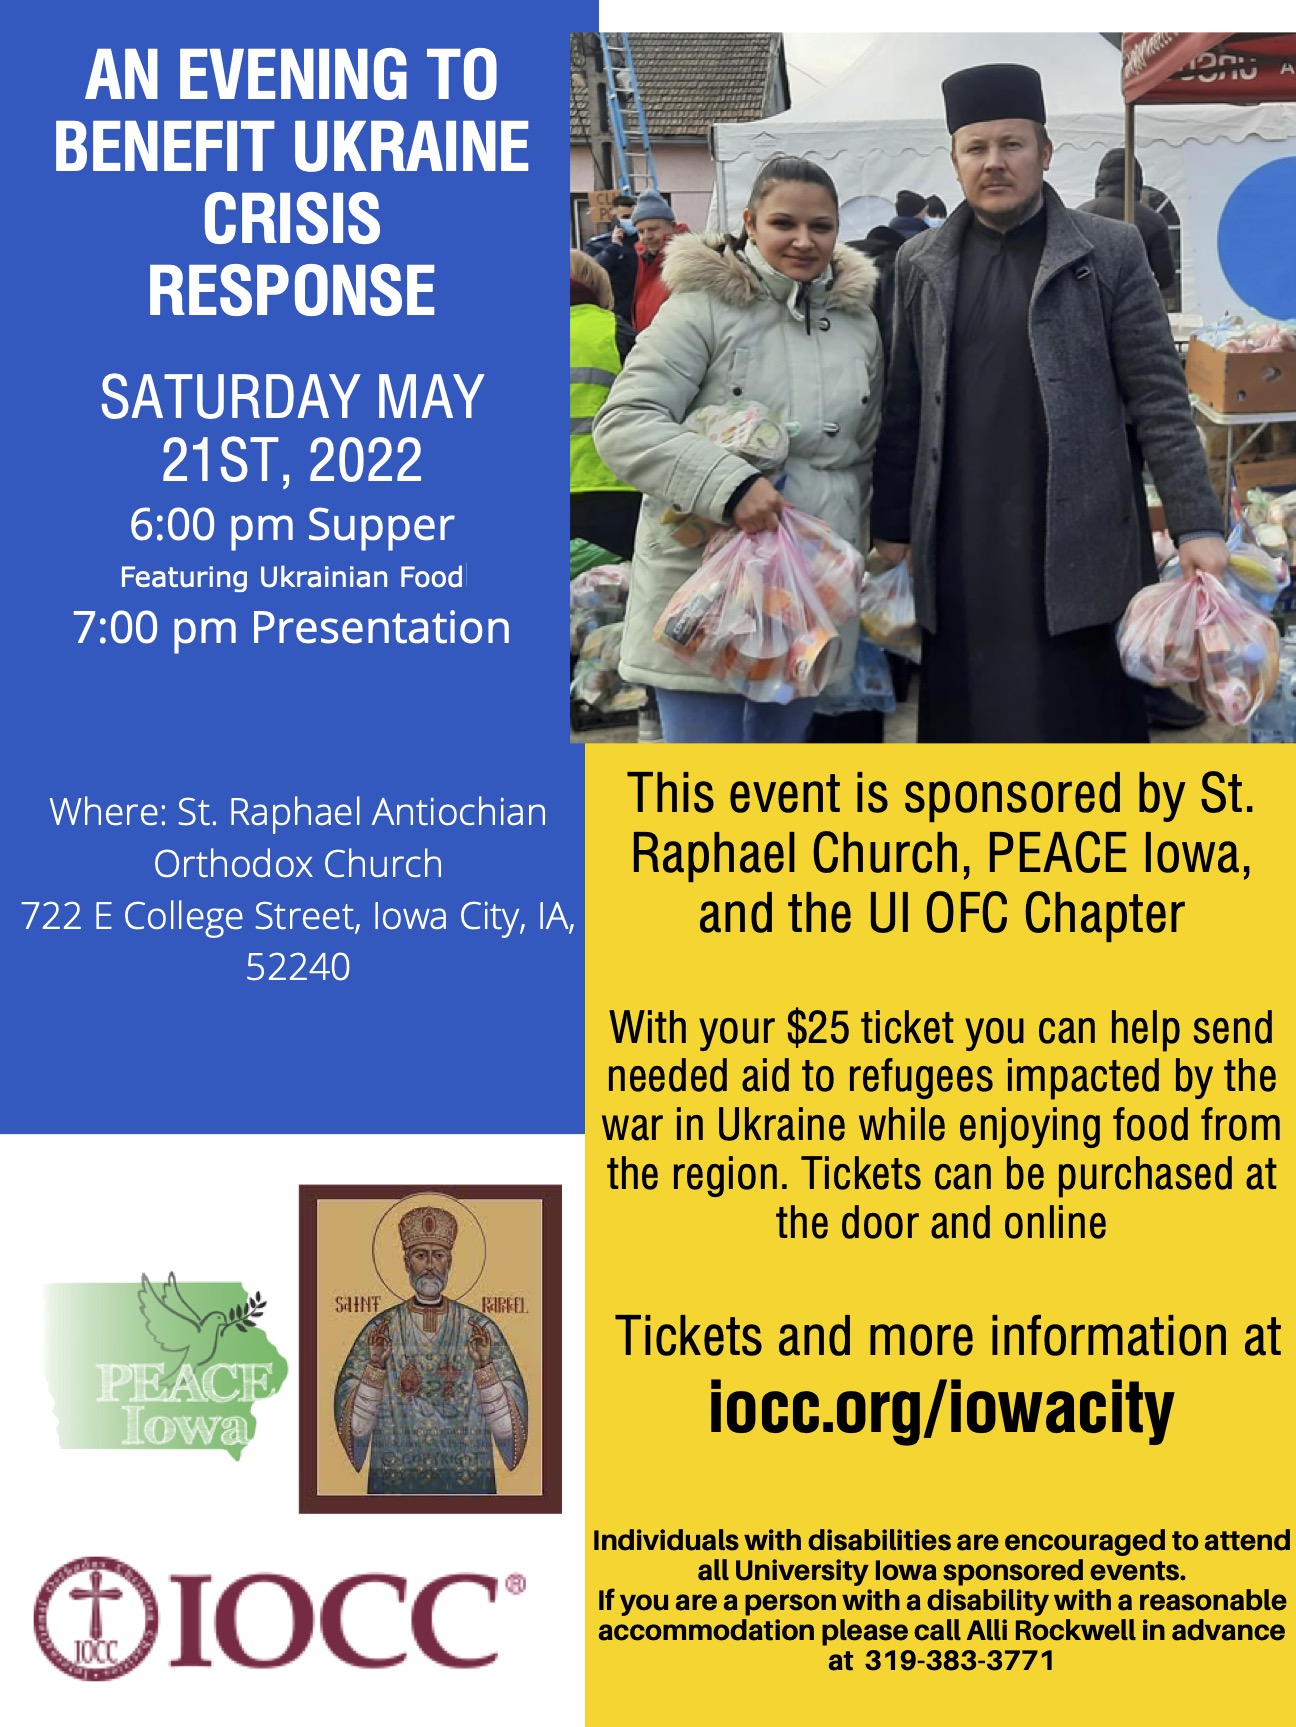 AN EVENING TO BENEFIT UKRAINE CRISIS RESPONSE - SATURDAY MAY 21ST, 2022. 6:00 pm Supper Featuring Ukrainian Food. 7:00 pm Presentation. Where: St. Raphael Antiochian Orthodox Church, 722 E College Street, Iowa City, IA, 52240. Click for more information (accessible PDF).